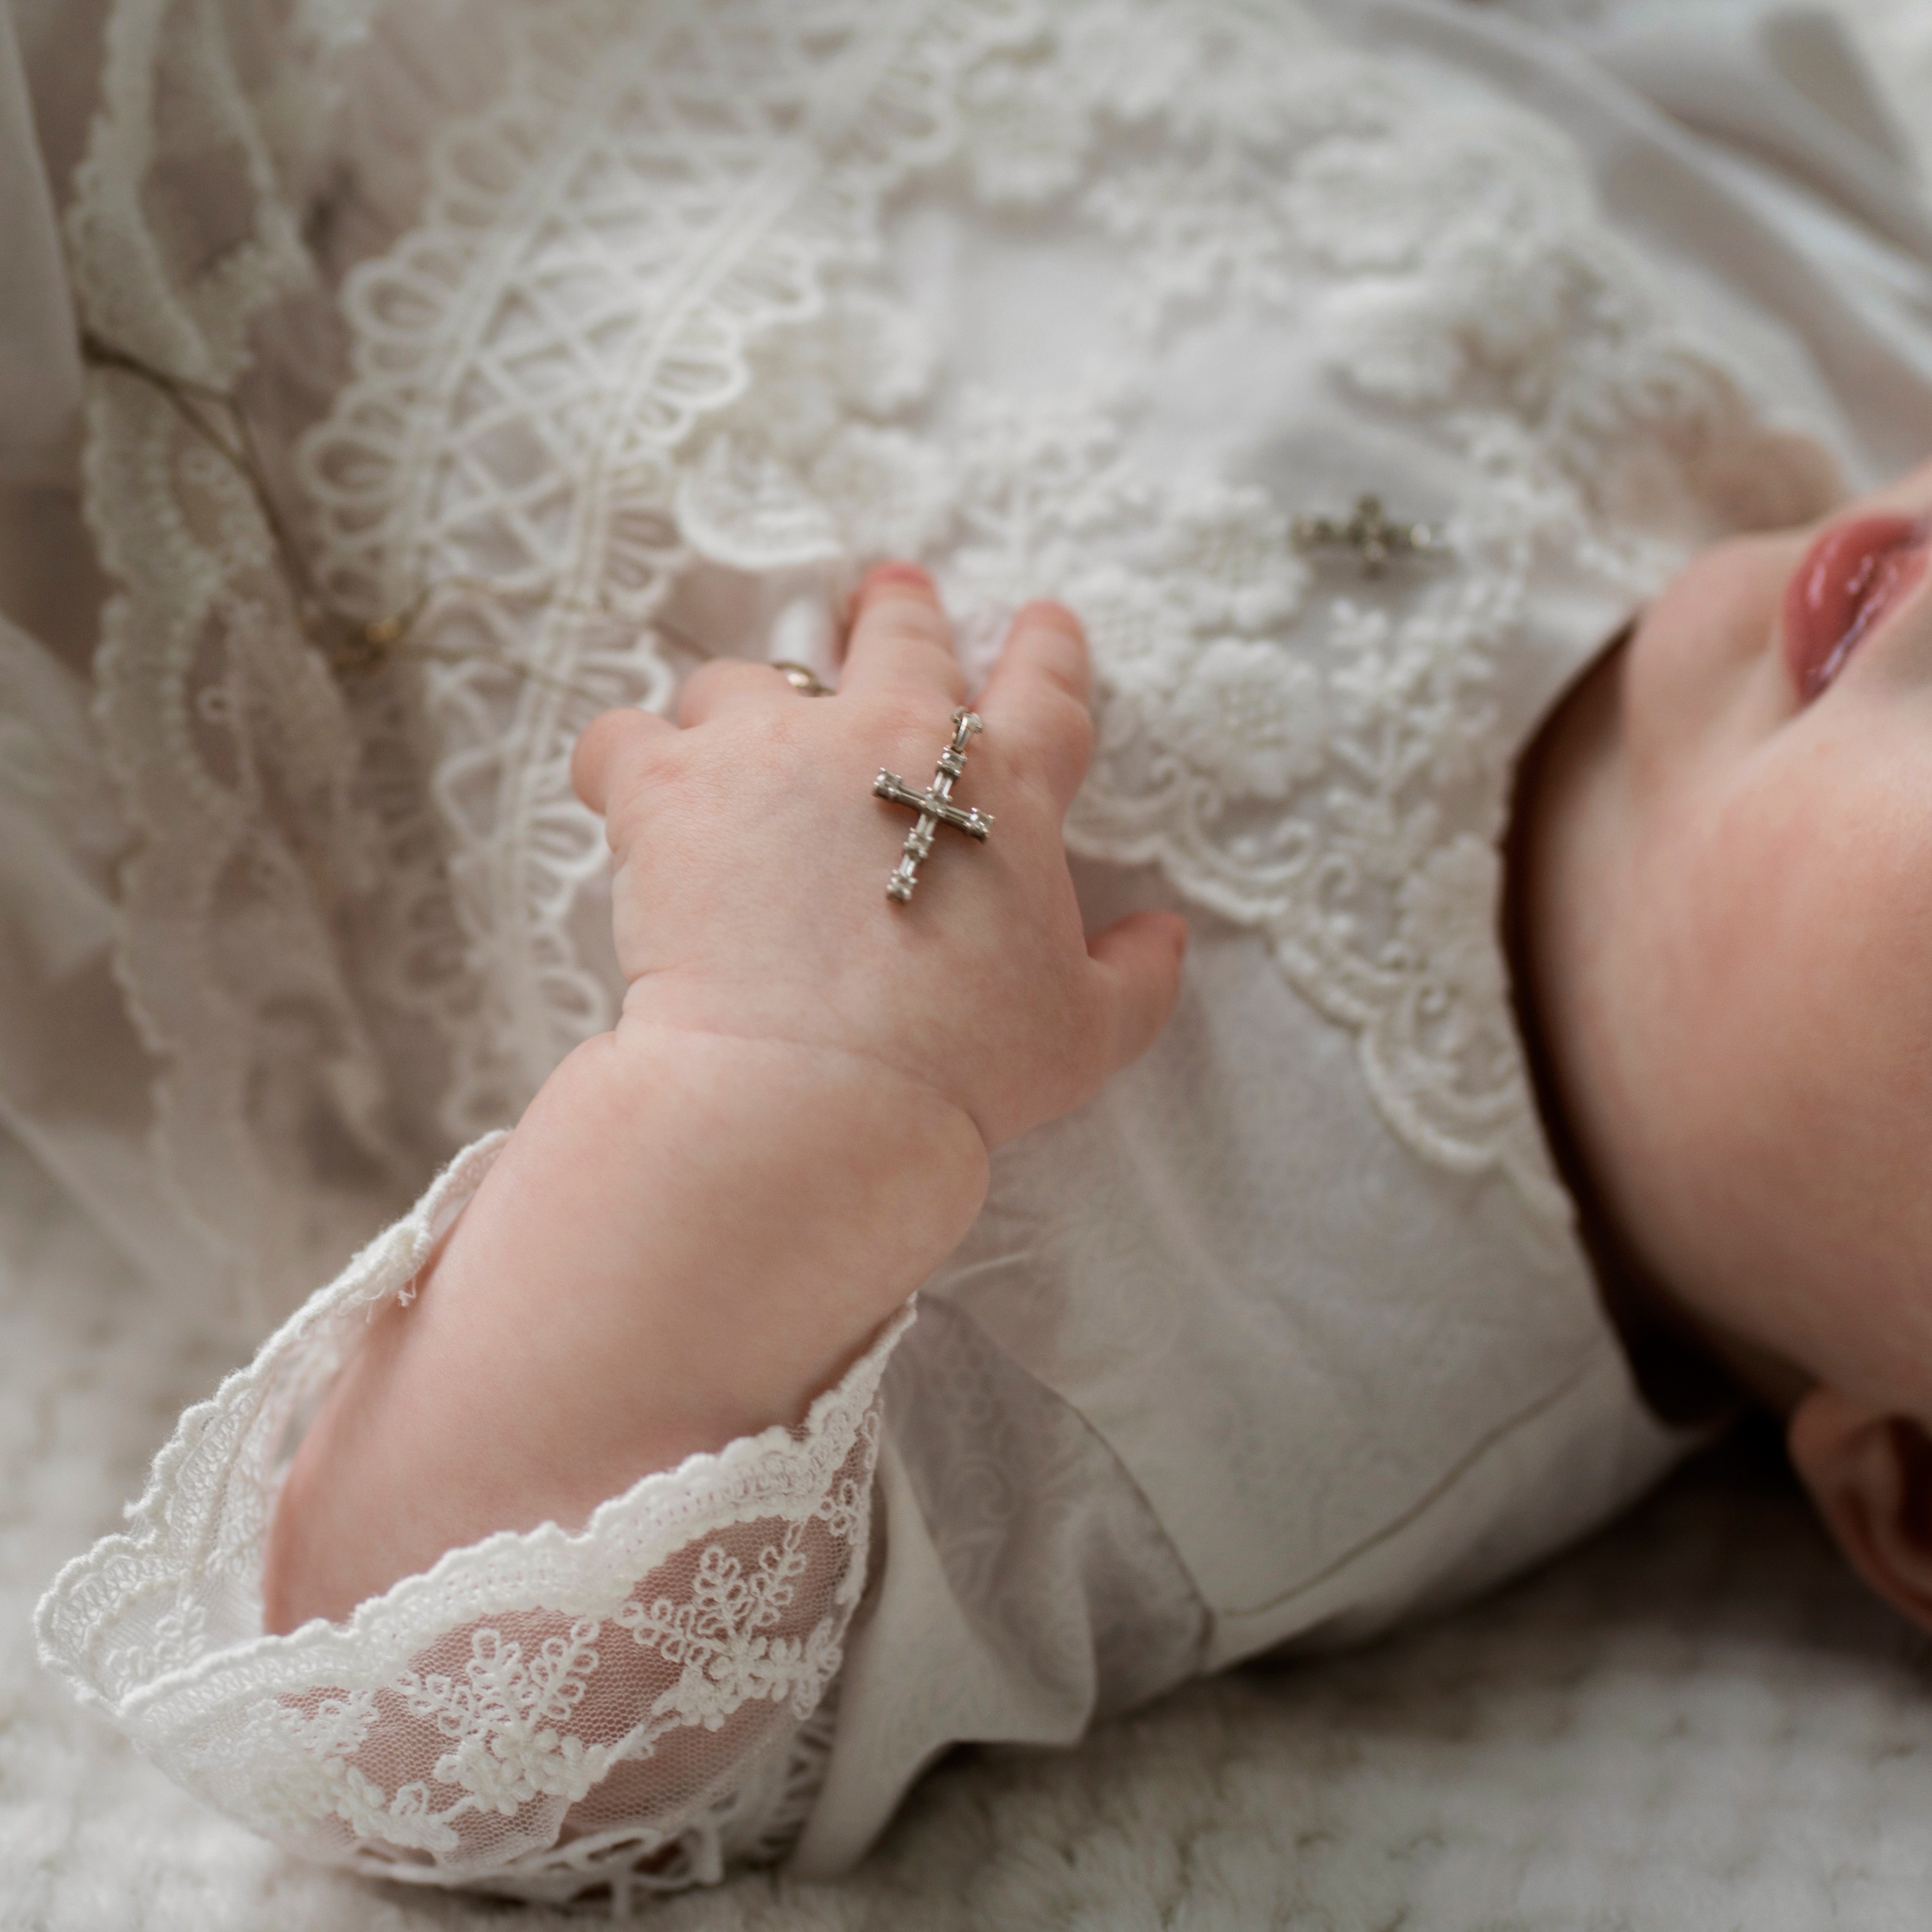 THE SACRAMENT OF BAPTISM - WHAT YOU NEED TO KNOW